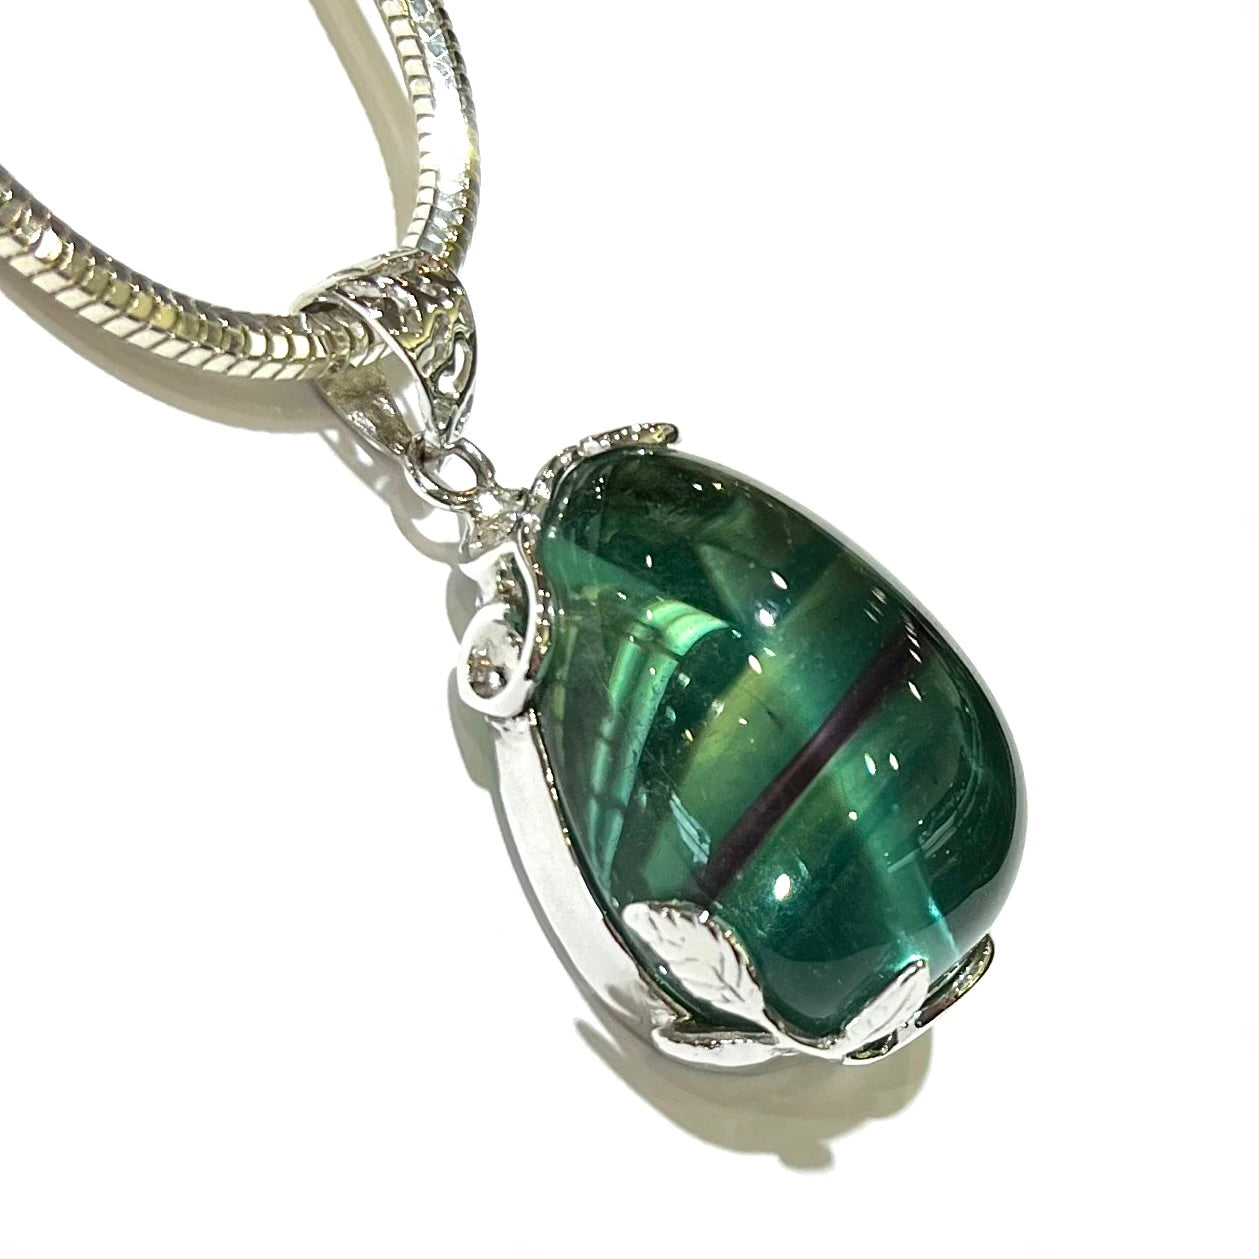 A solitaire gemstone pendant featuring a cabochon-cut pear shape clear green fluorite stone with purple banding on a thick sterling silver snake chain.  The gem is held by prongs shaped like leaves and vines.